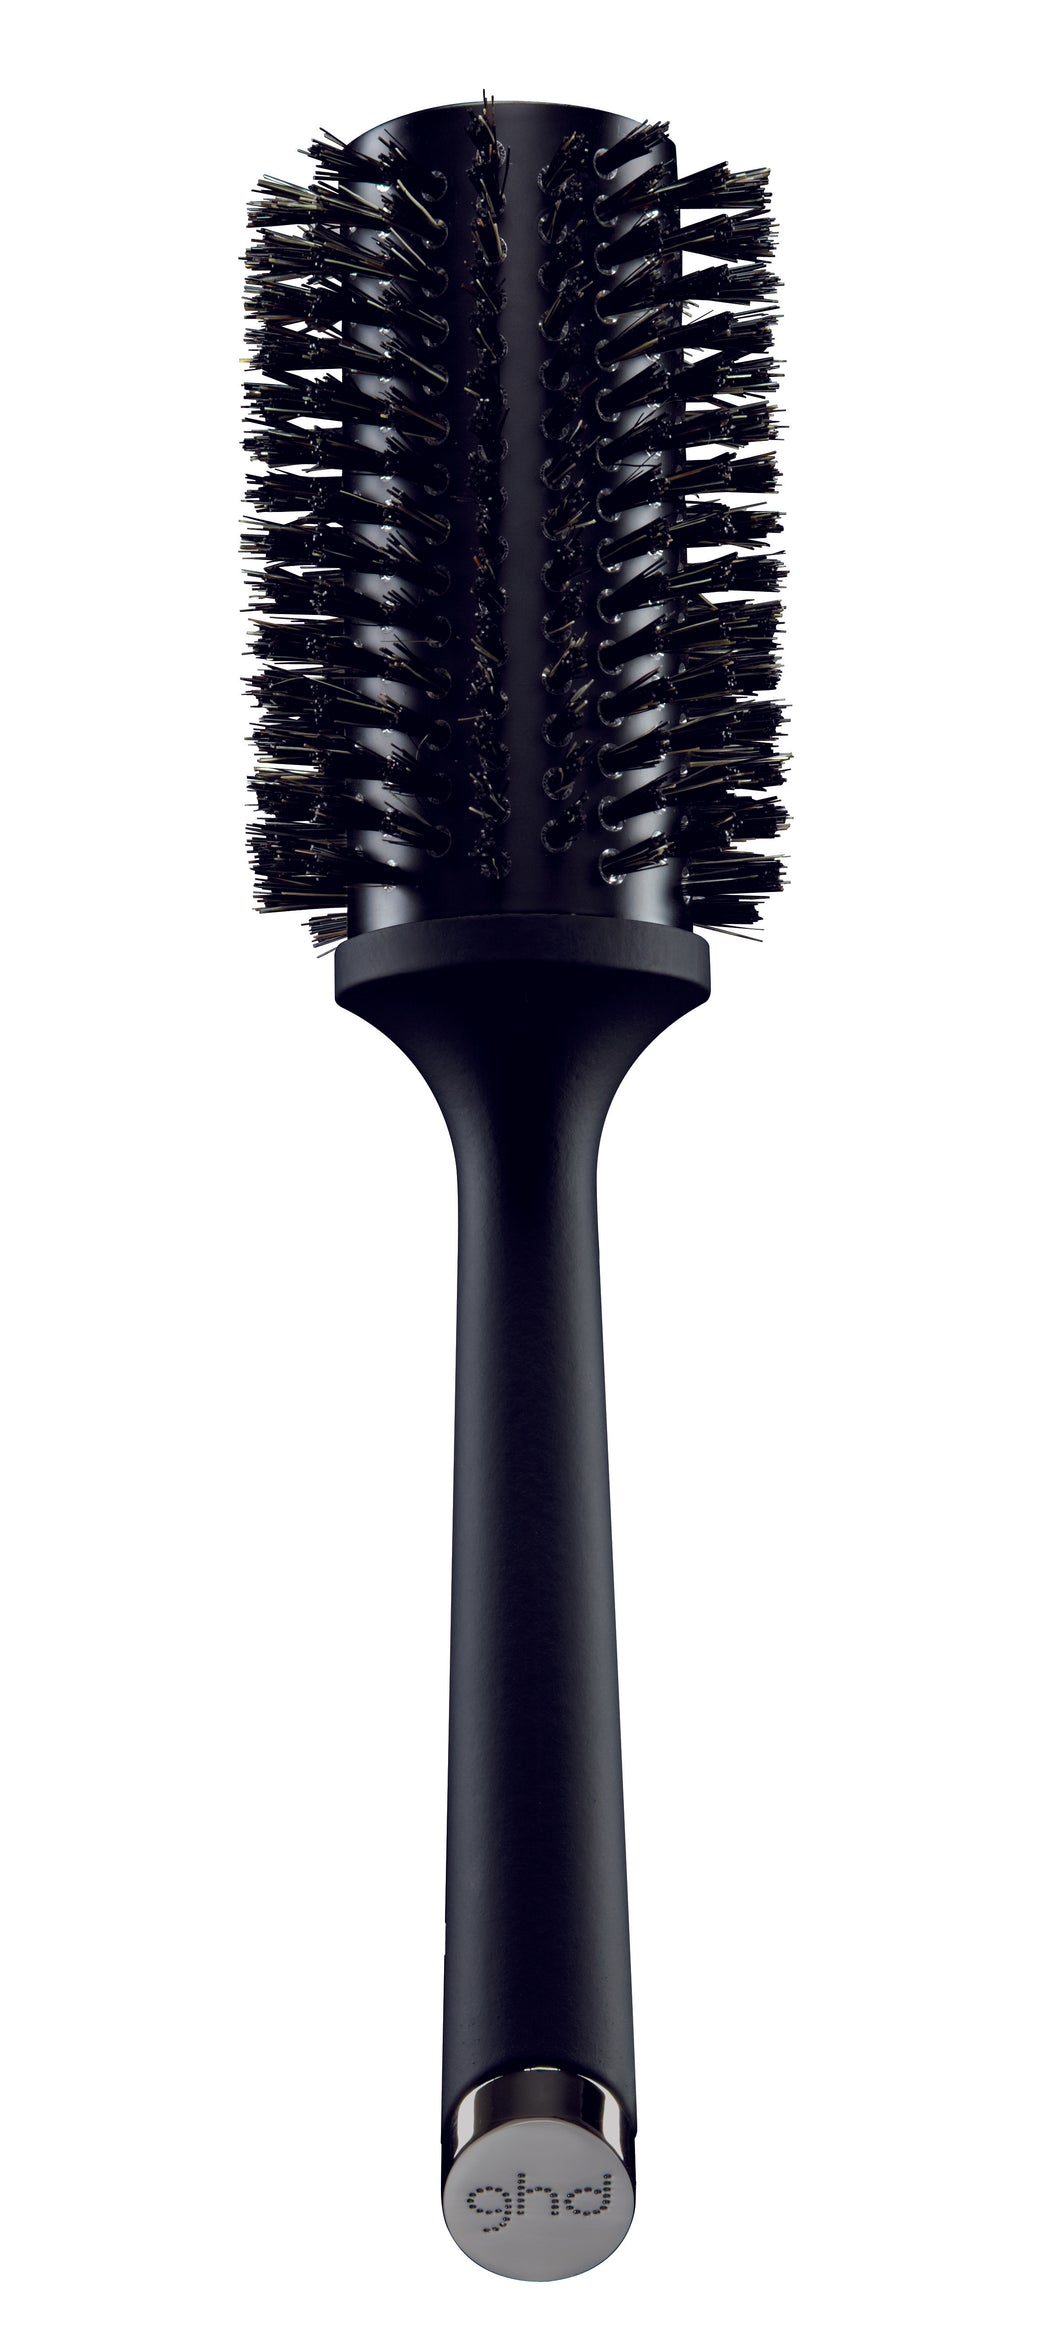 GHD Natural Bristle Radial Brush 44mm Best for... The large barrel of the size 3 brush is best for blow-drying longer hair. Natural bristles create a smoother finish.  To use... Blast hair until it’s 80% dry. Working with medium sections, place the brush into the root area and direct the heat from your dryer at the barrel. Keep the tension as you move the brush through your hair, directing heat at the barrel as you go.